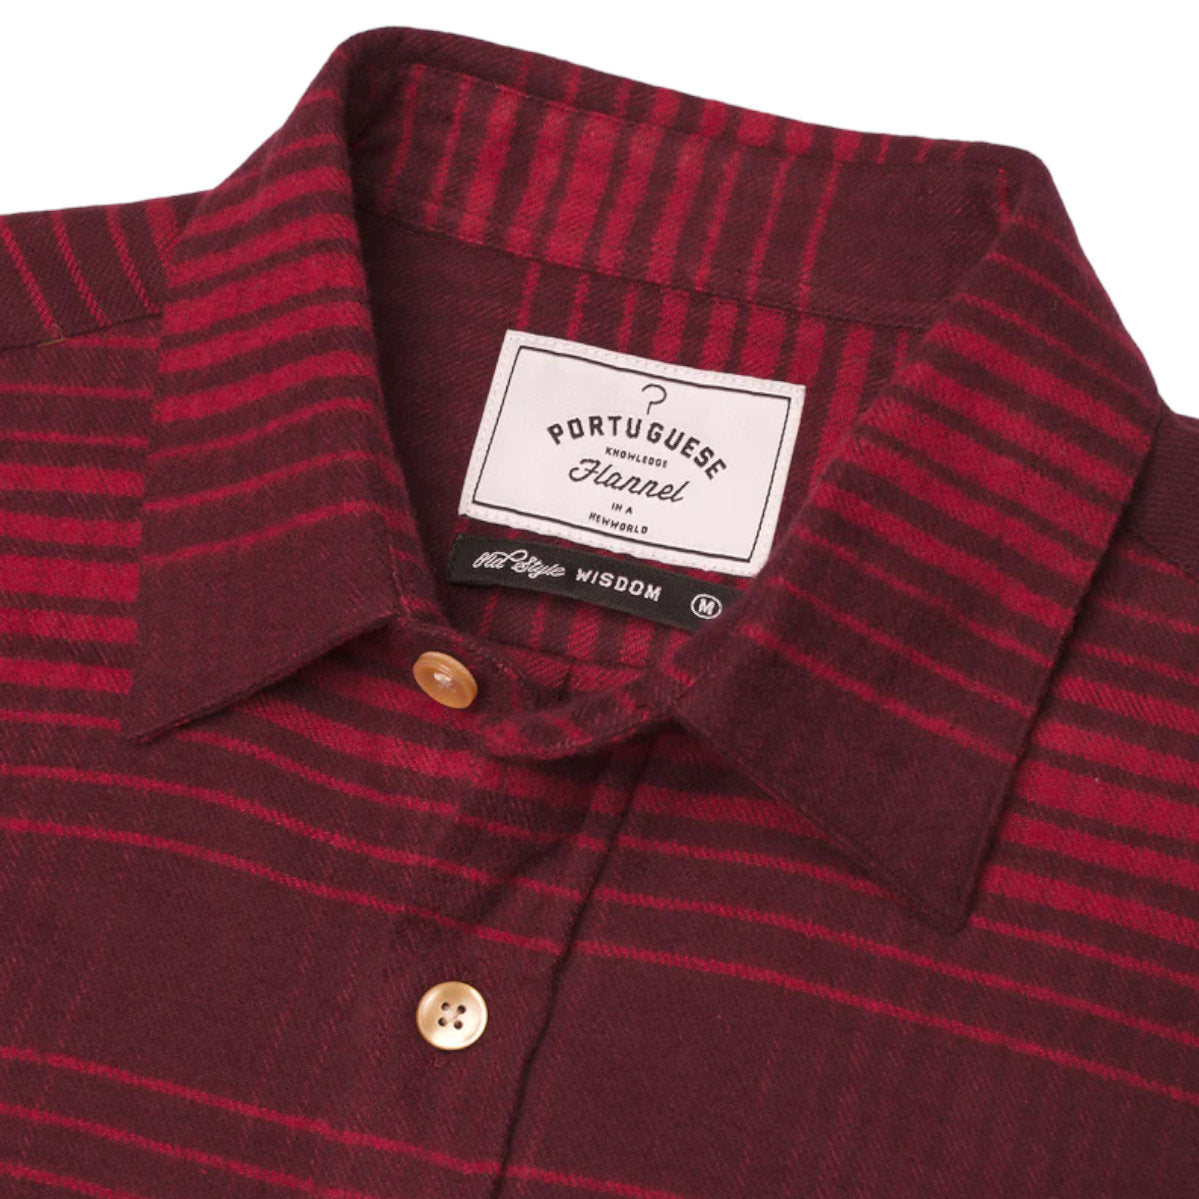 Paralele Flannel Shirt - Red